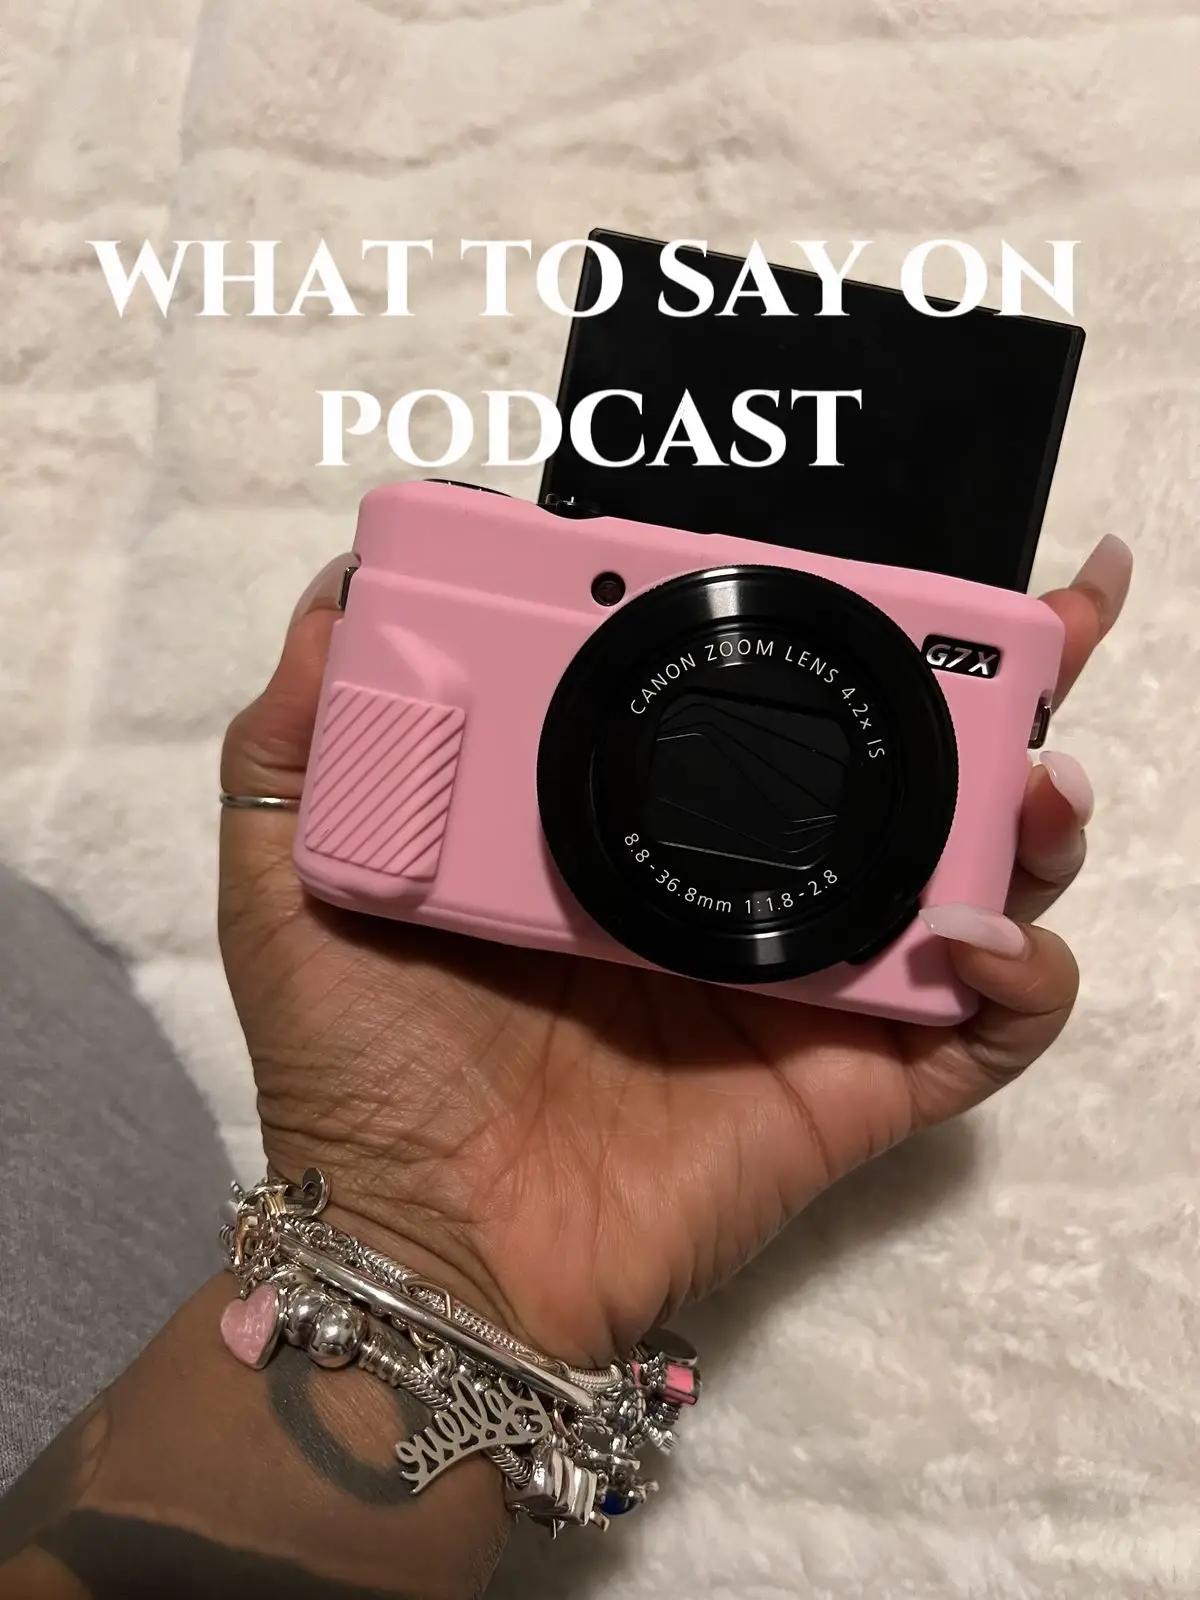 WHAT TO SAY ON YOUR PODCAST 's images